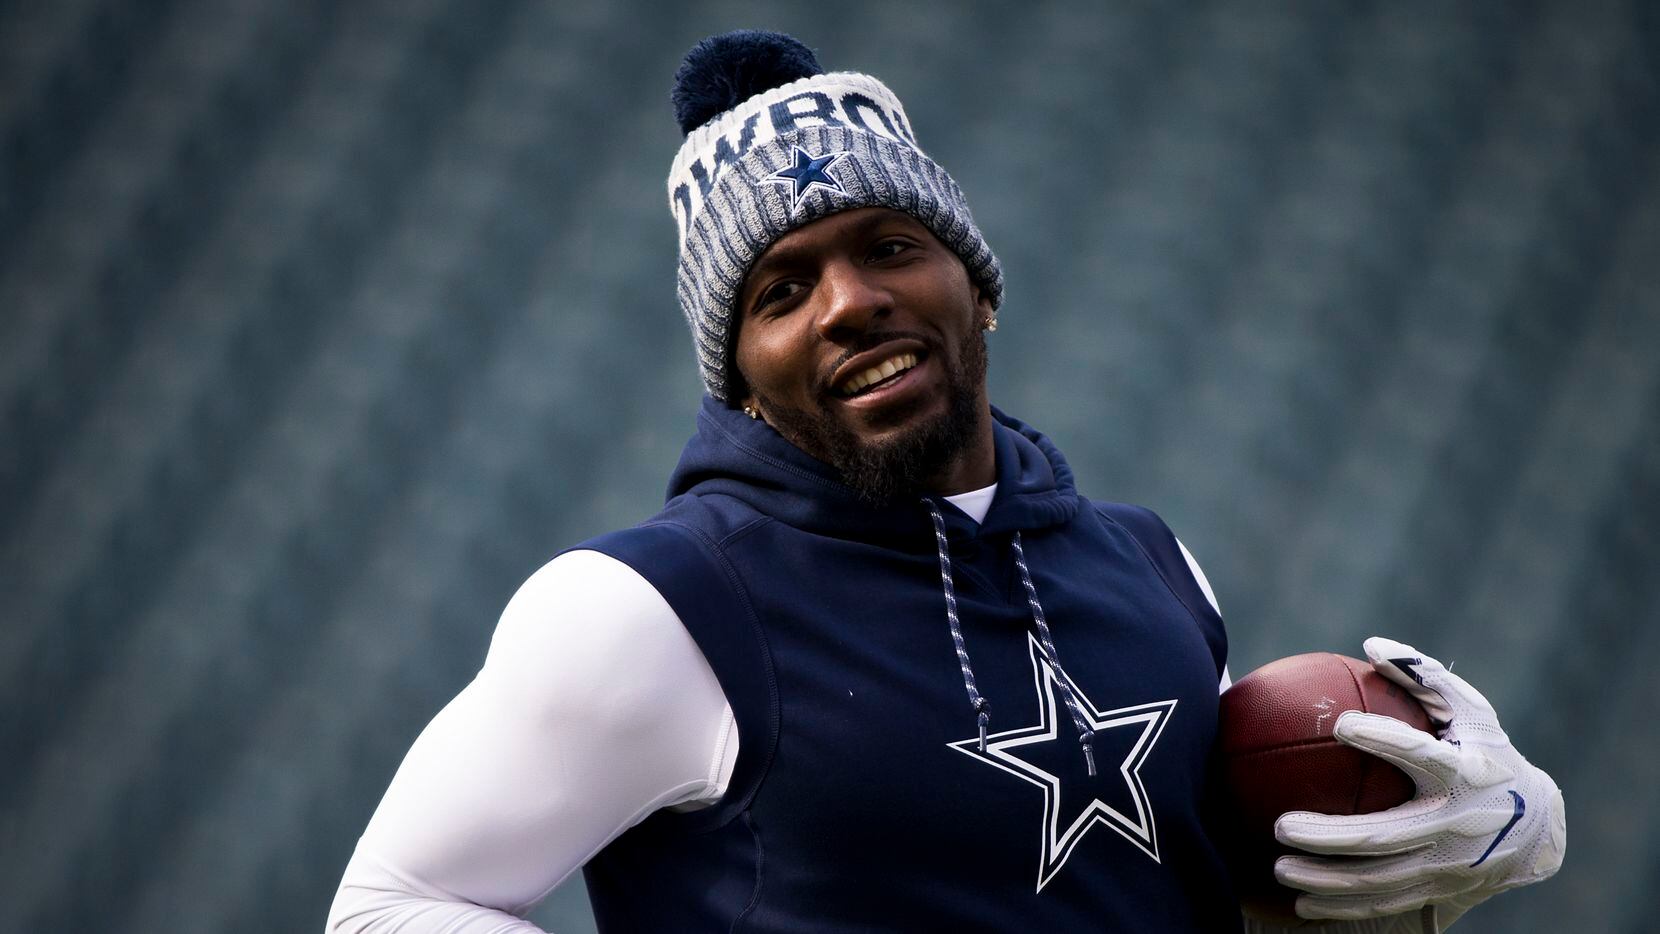 Dallas Cowboys wide receiver Dez Bryant warms up before an NFL football game against the Philadelphia Eagles on Sunday, Dec. 31, 2017, in Philadelphia.